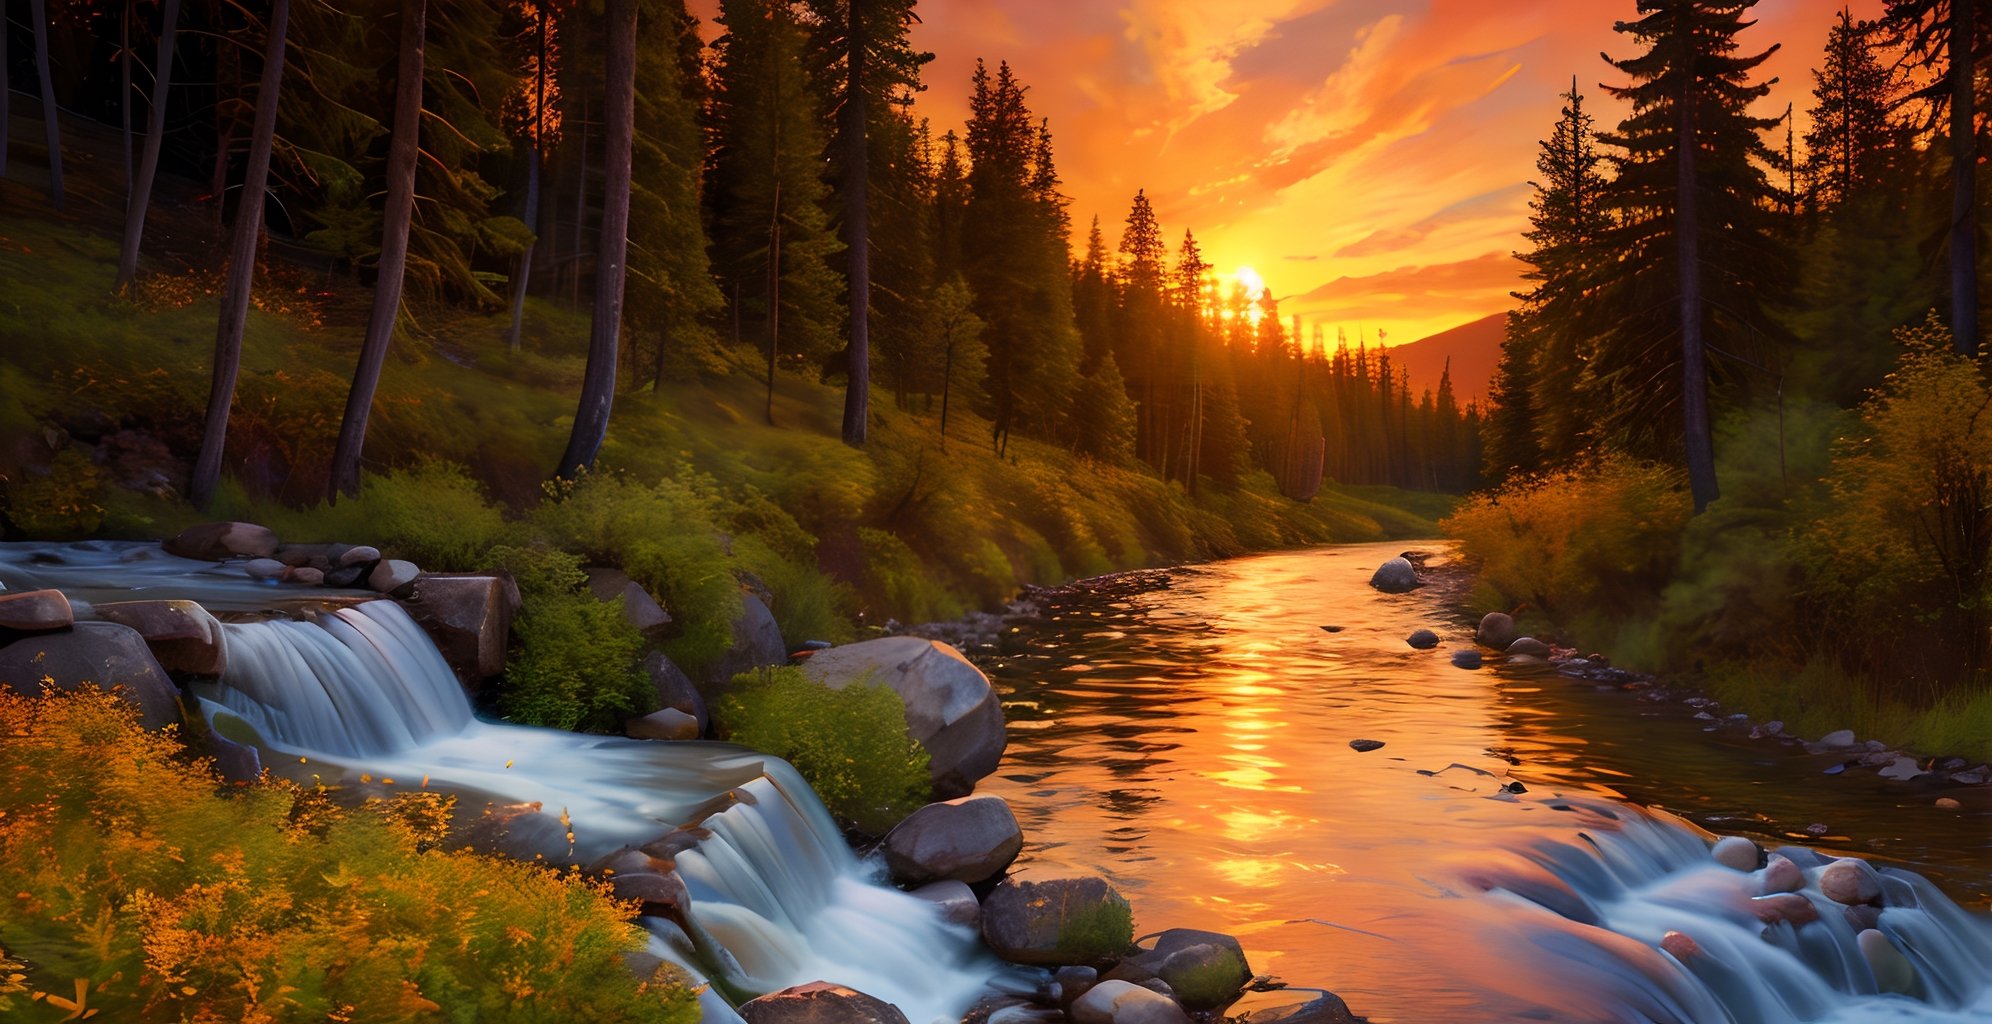 masterpiece, high quality, forest, sunset, river, salmon run,